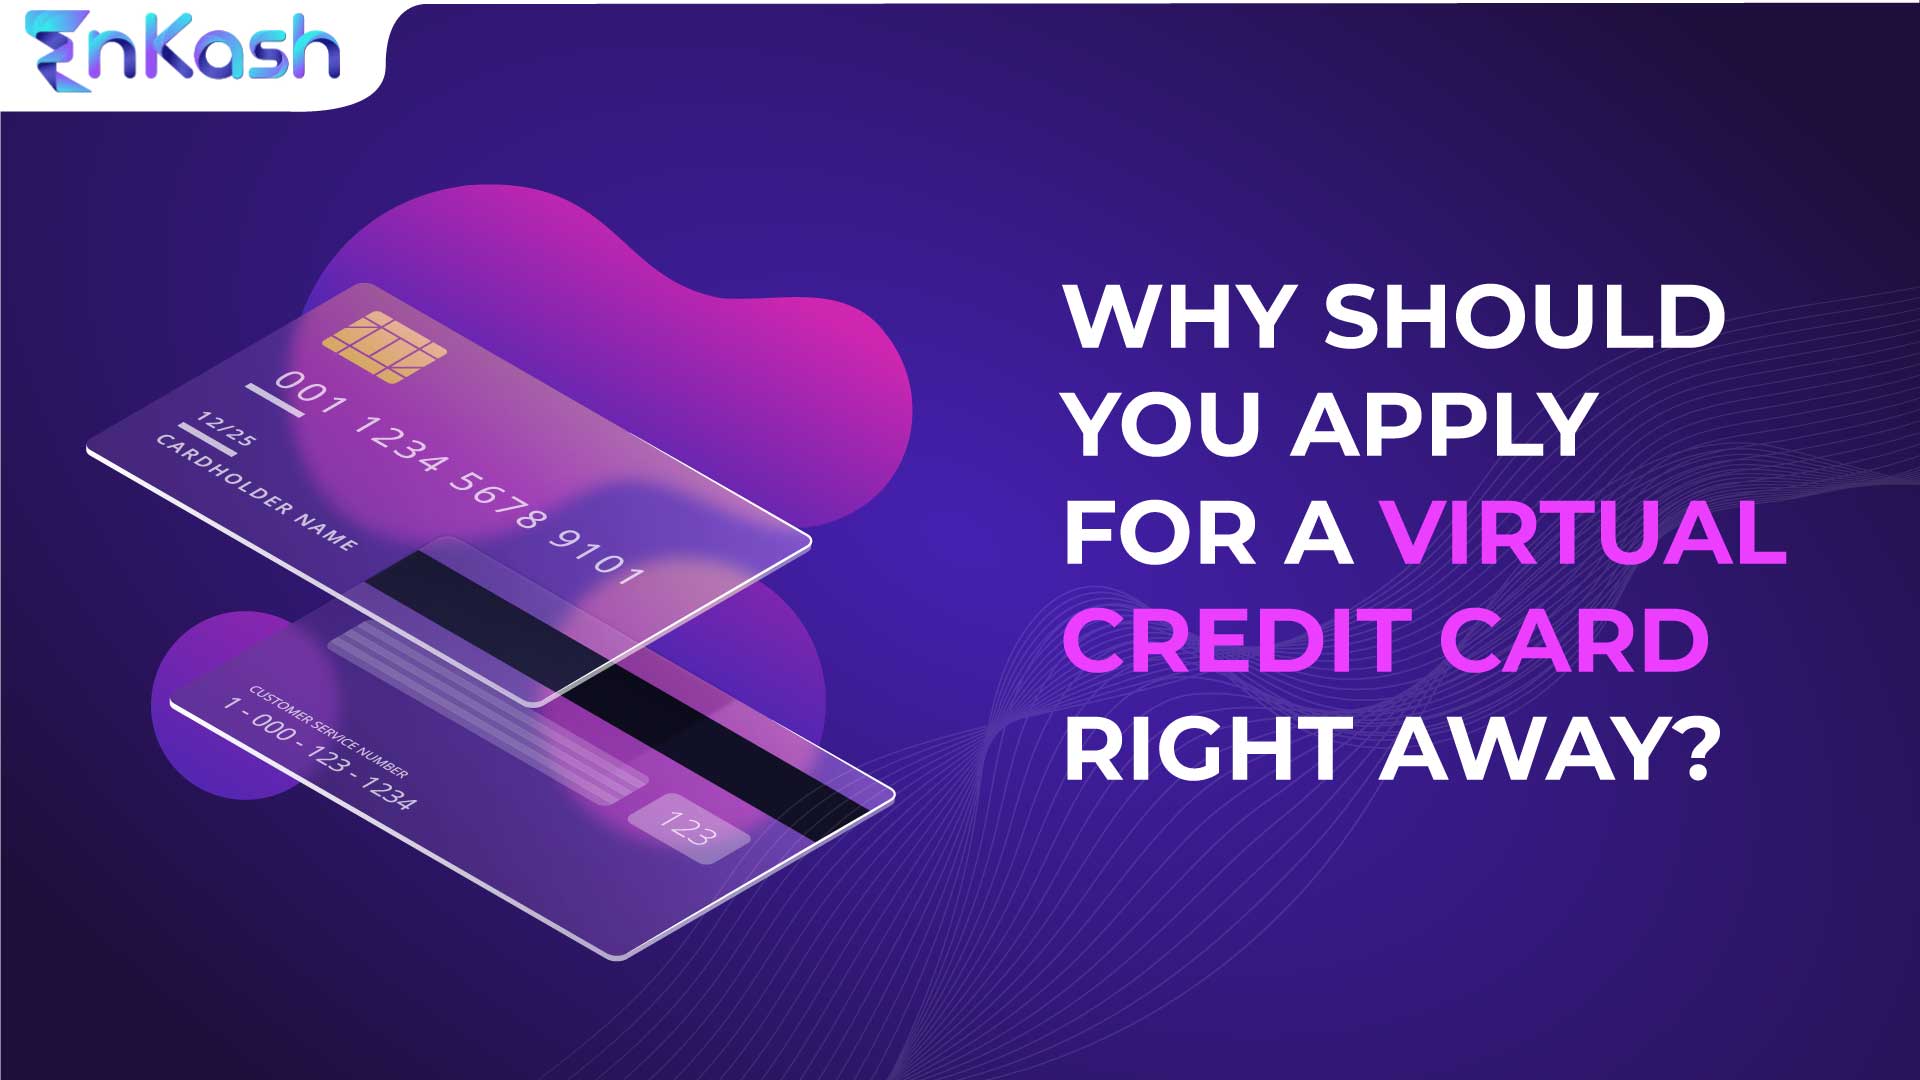 Why Should You Apply for a Virtual Credit Card